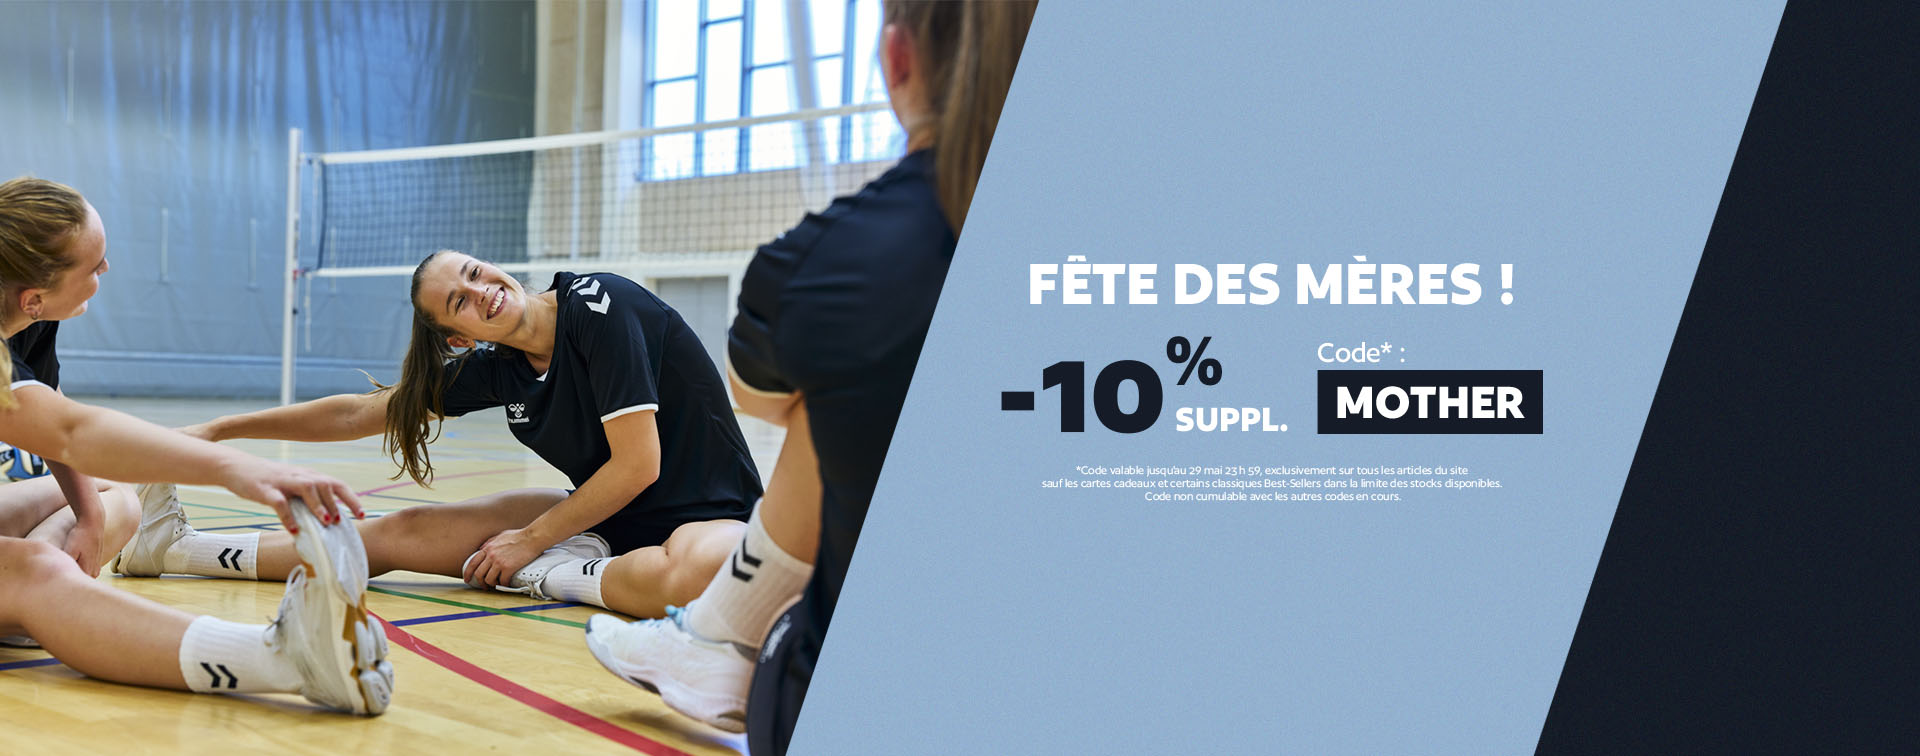 Code promo direct-volley.fr